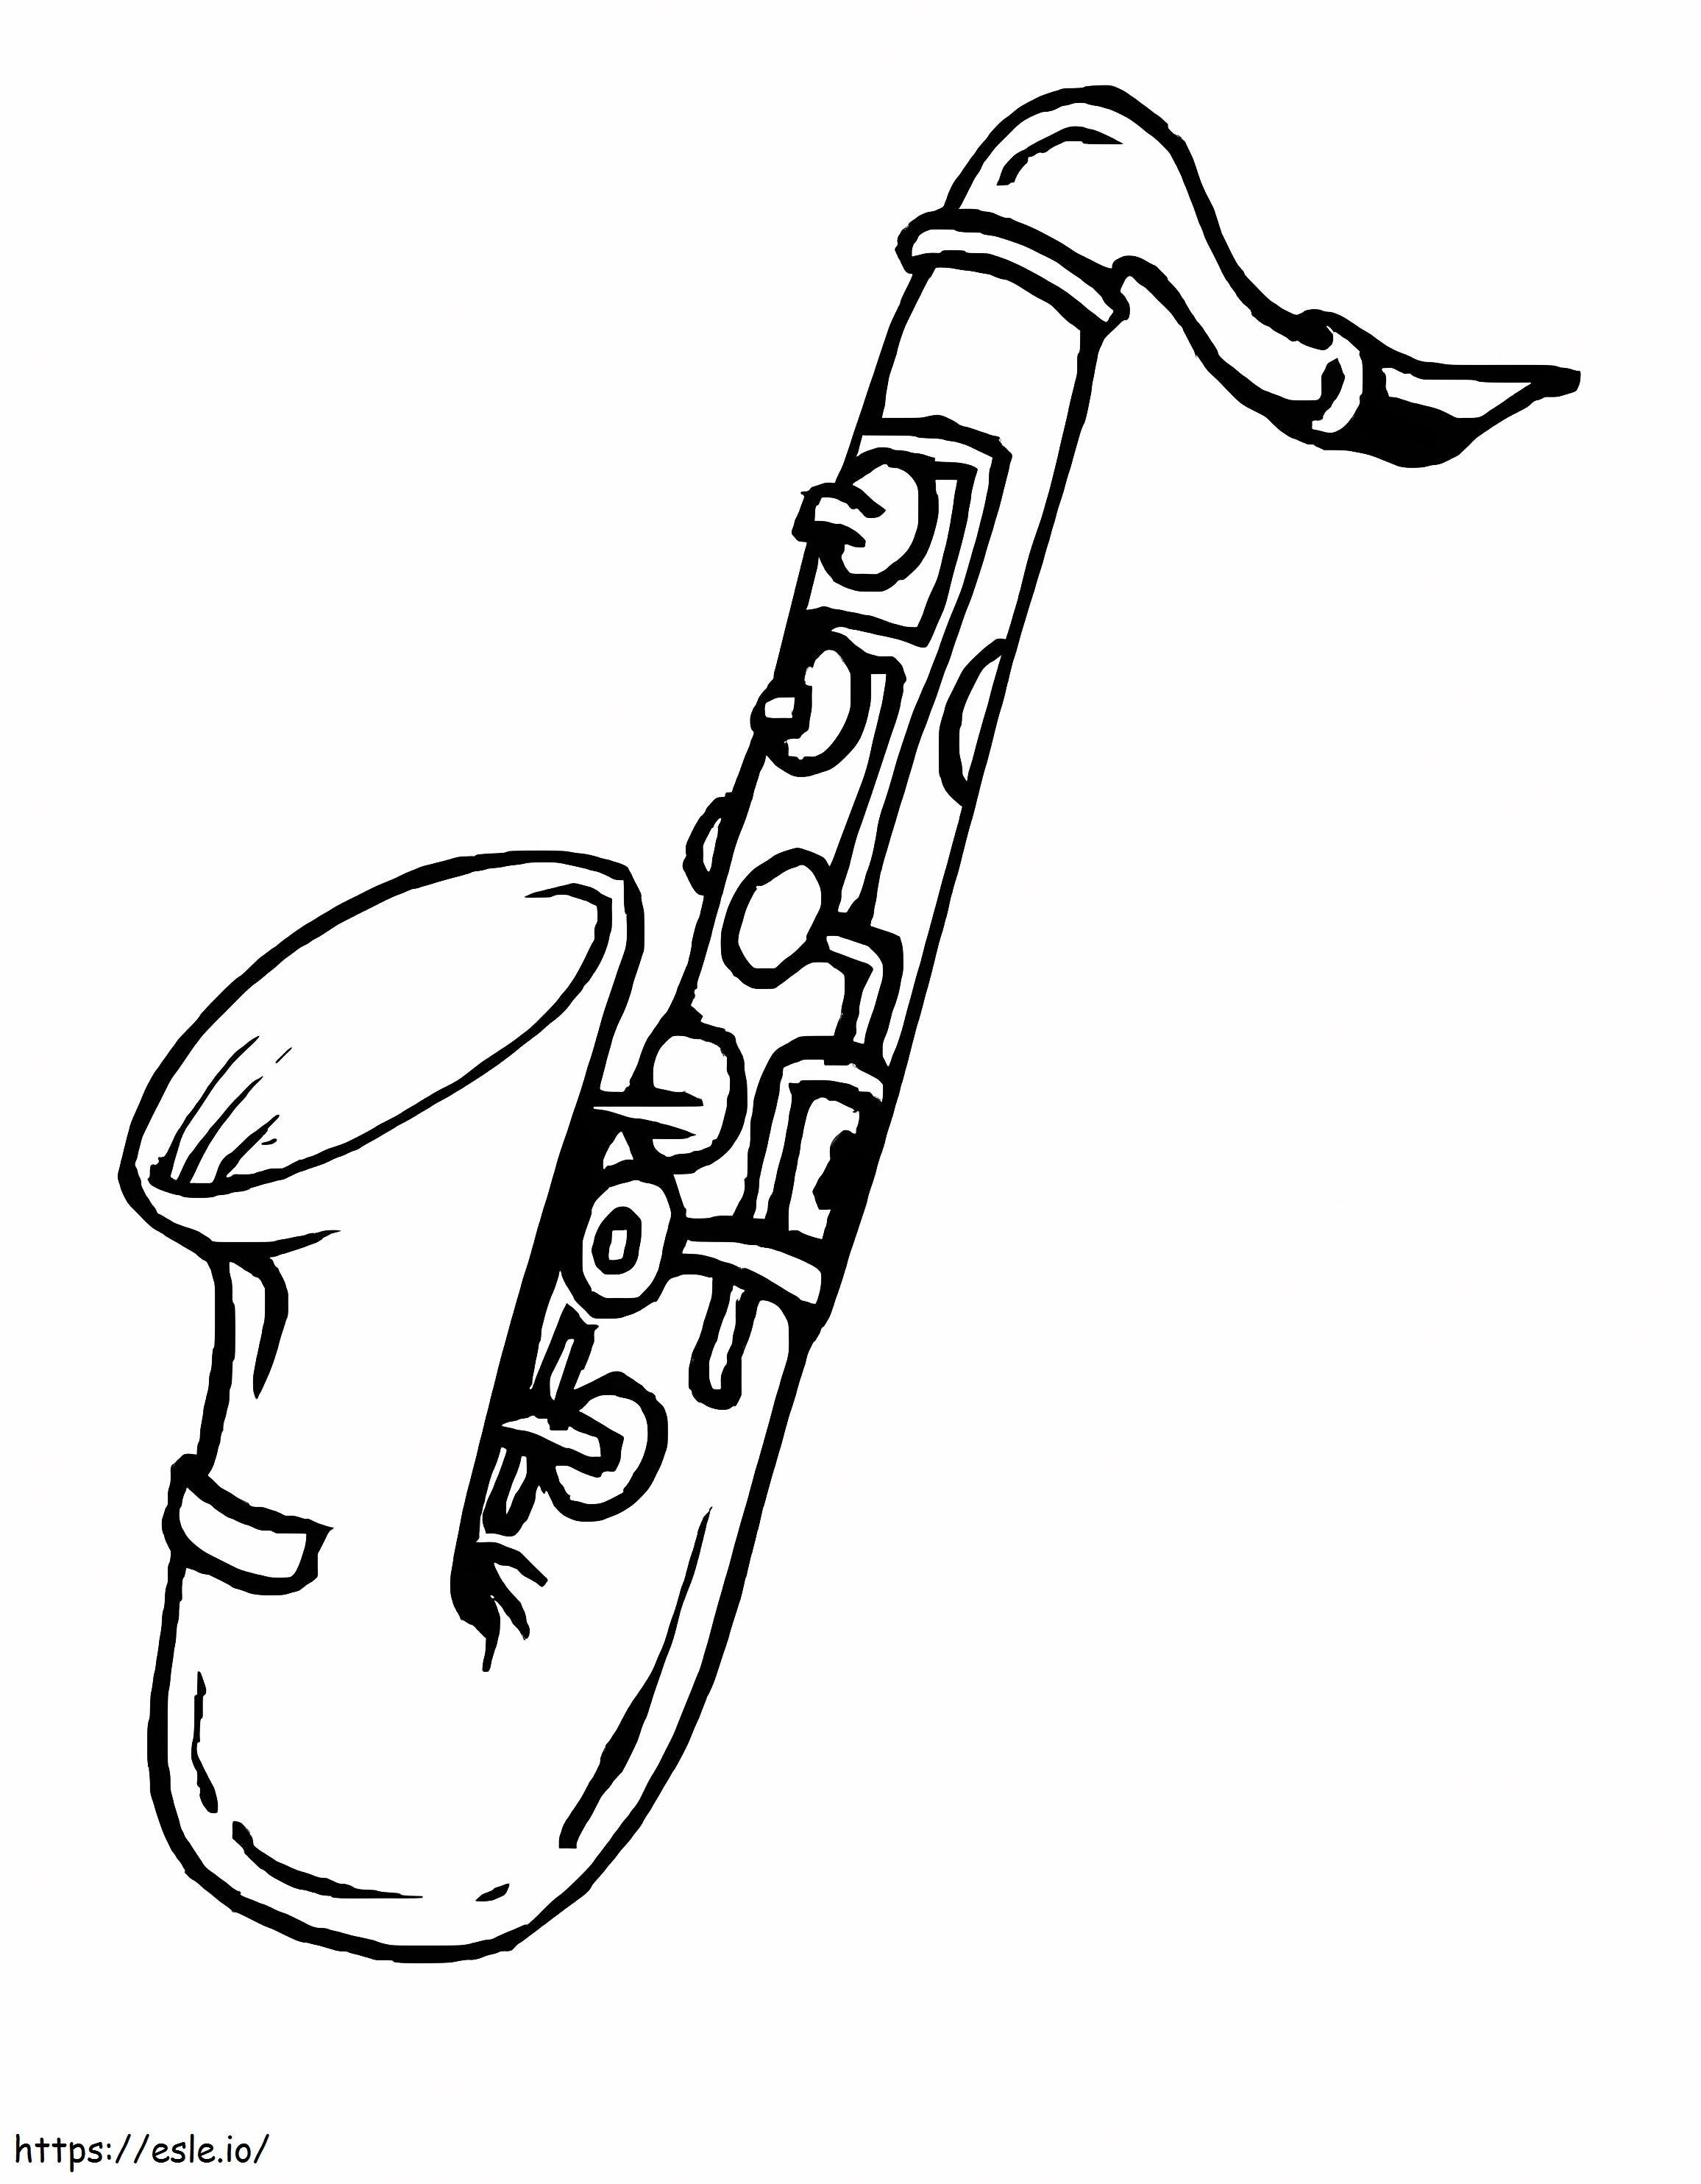 Normal Saxophone 1 coloring page